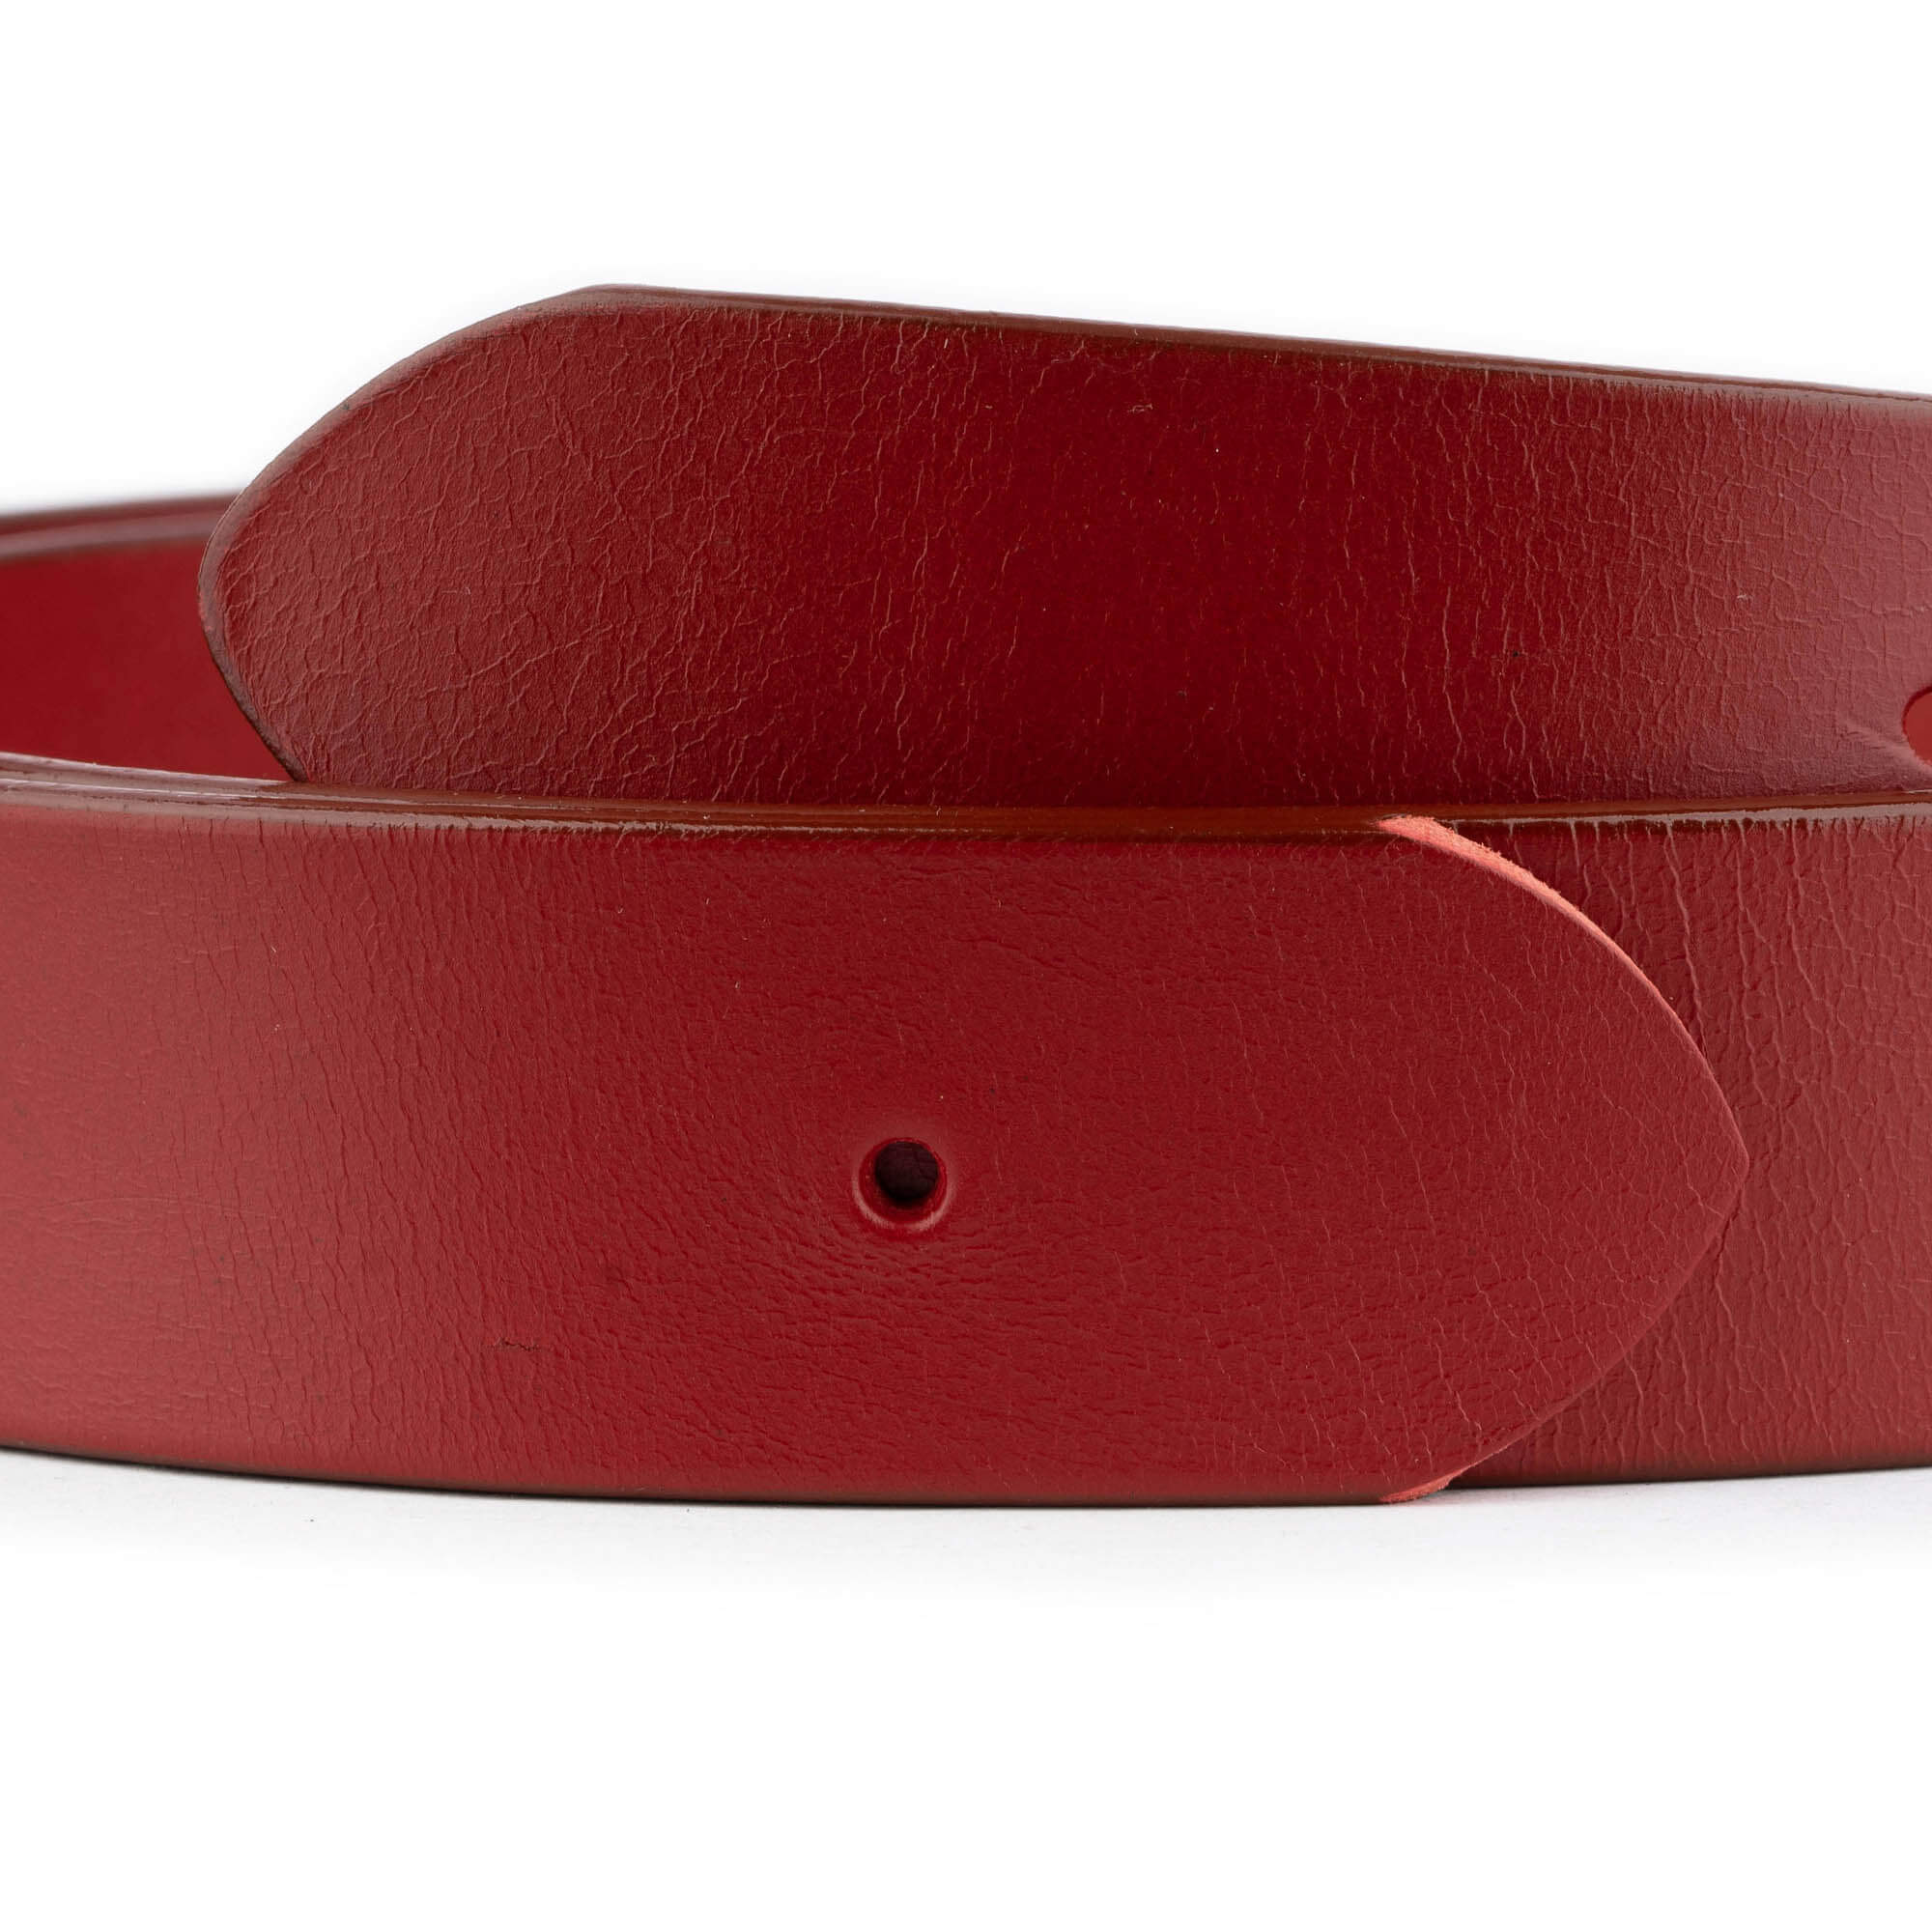 Red Belt Strap for Buckles Replacement